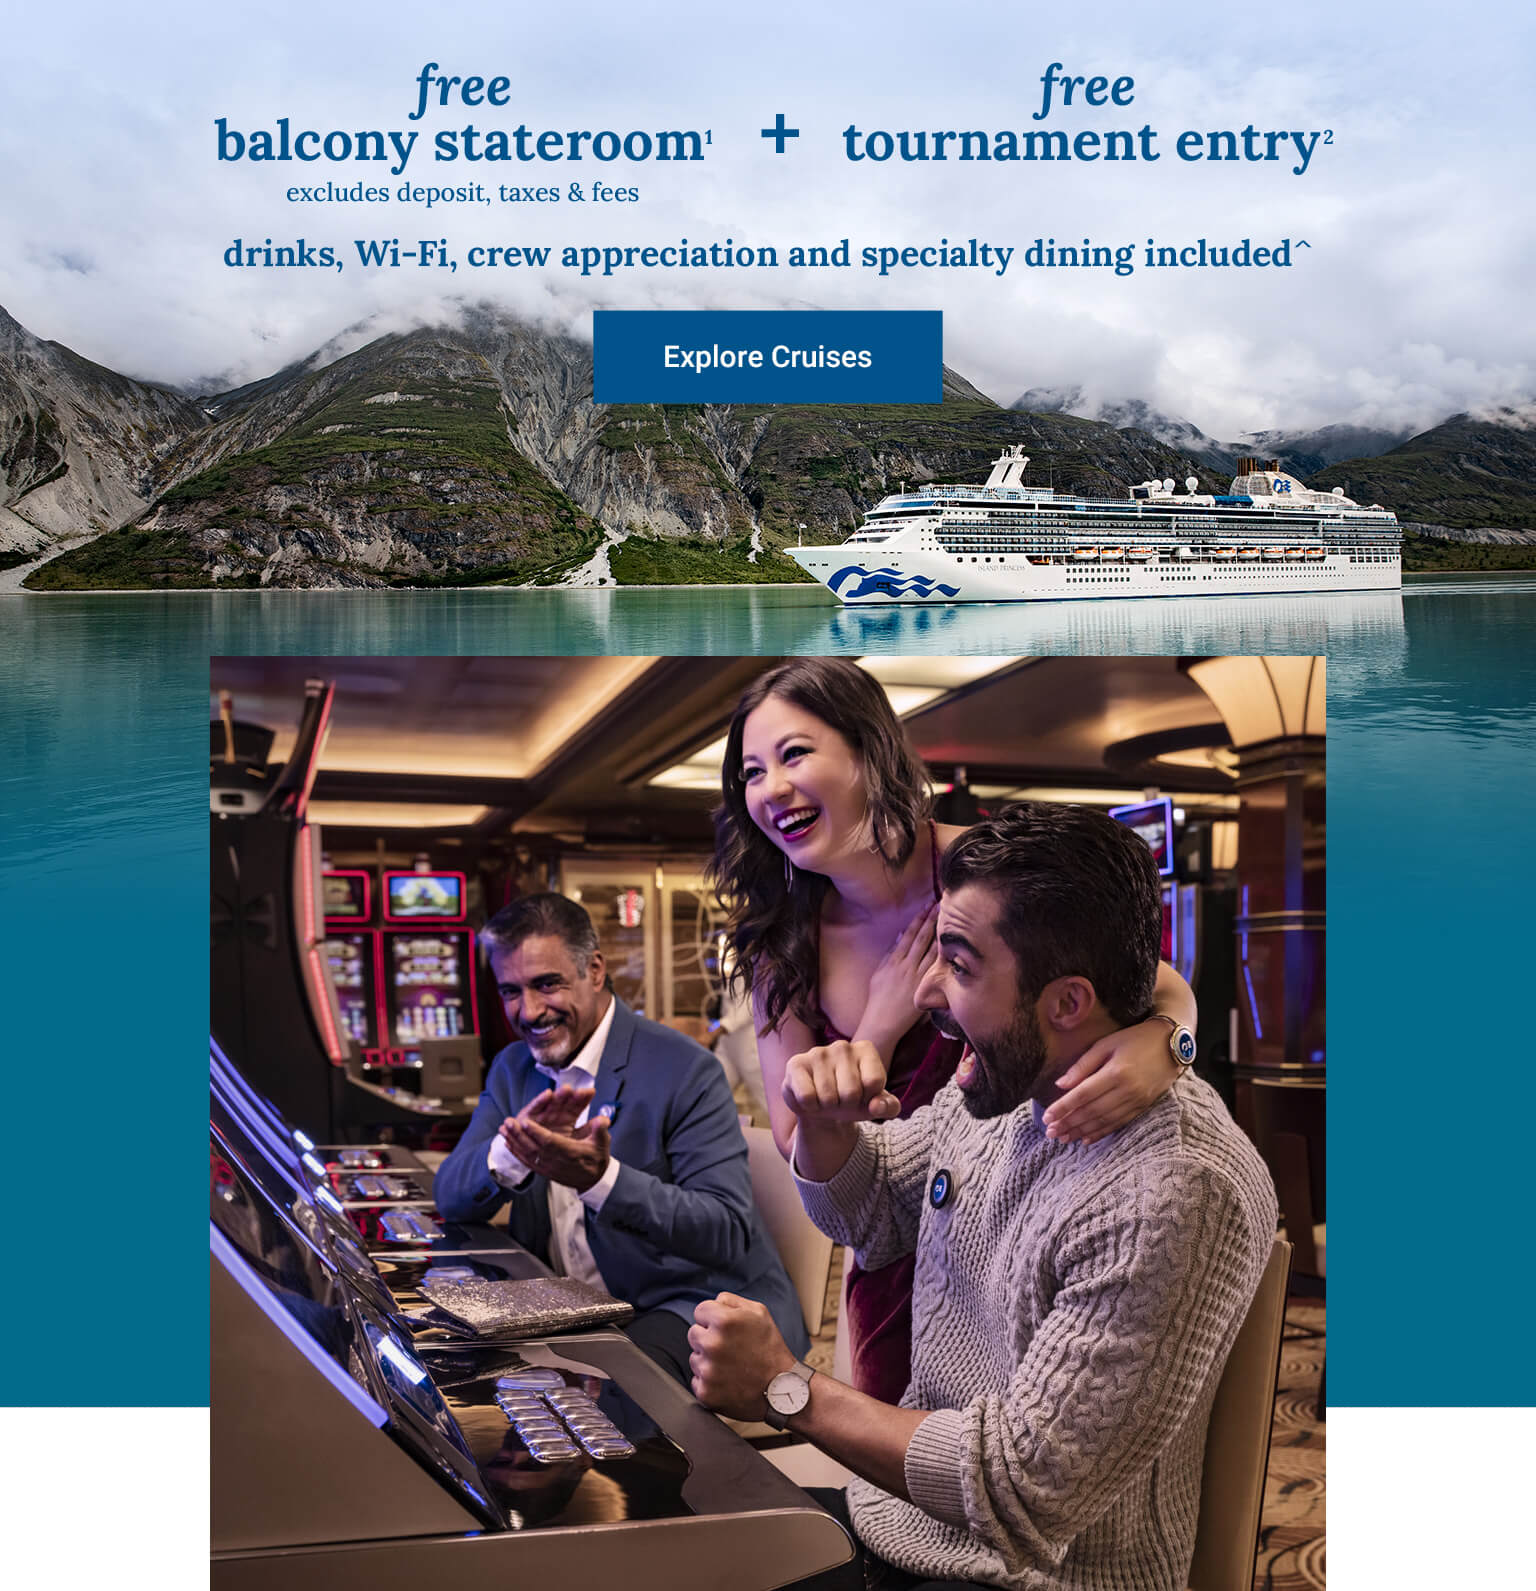 free balcony stateroom[1[ (excludes deposit, taxes & fees) + free tournament entry[2] + drinks, Wi-Fi, crew appreciation and specialty dining included^